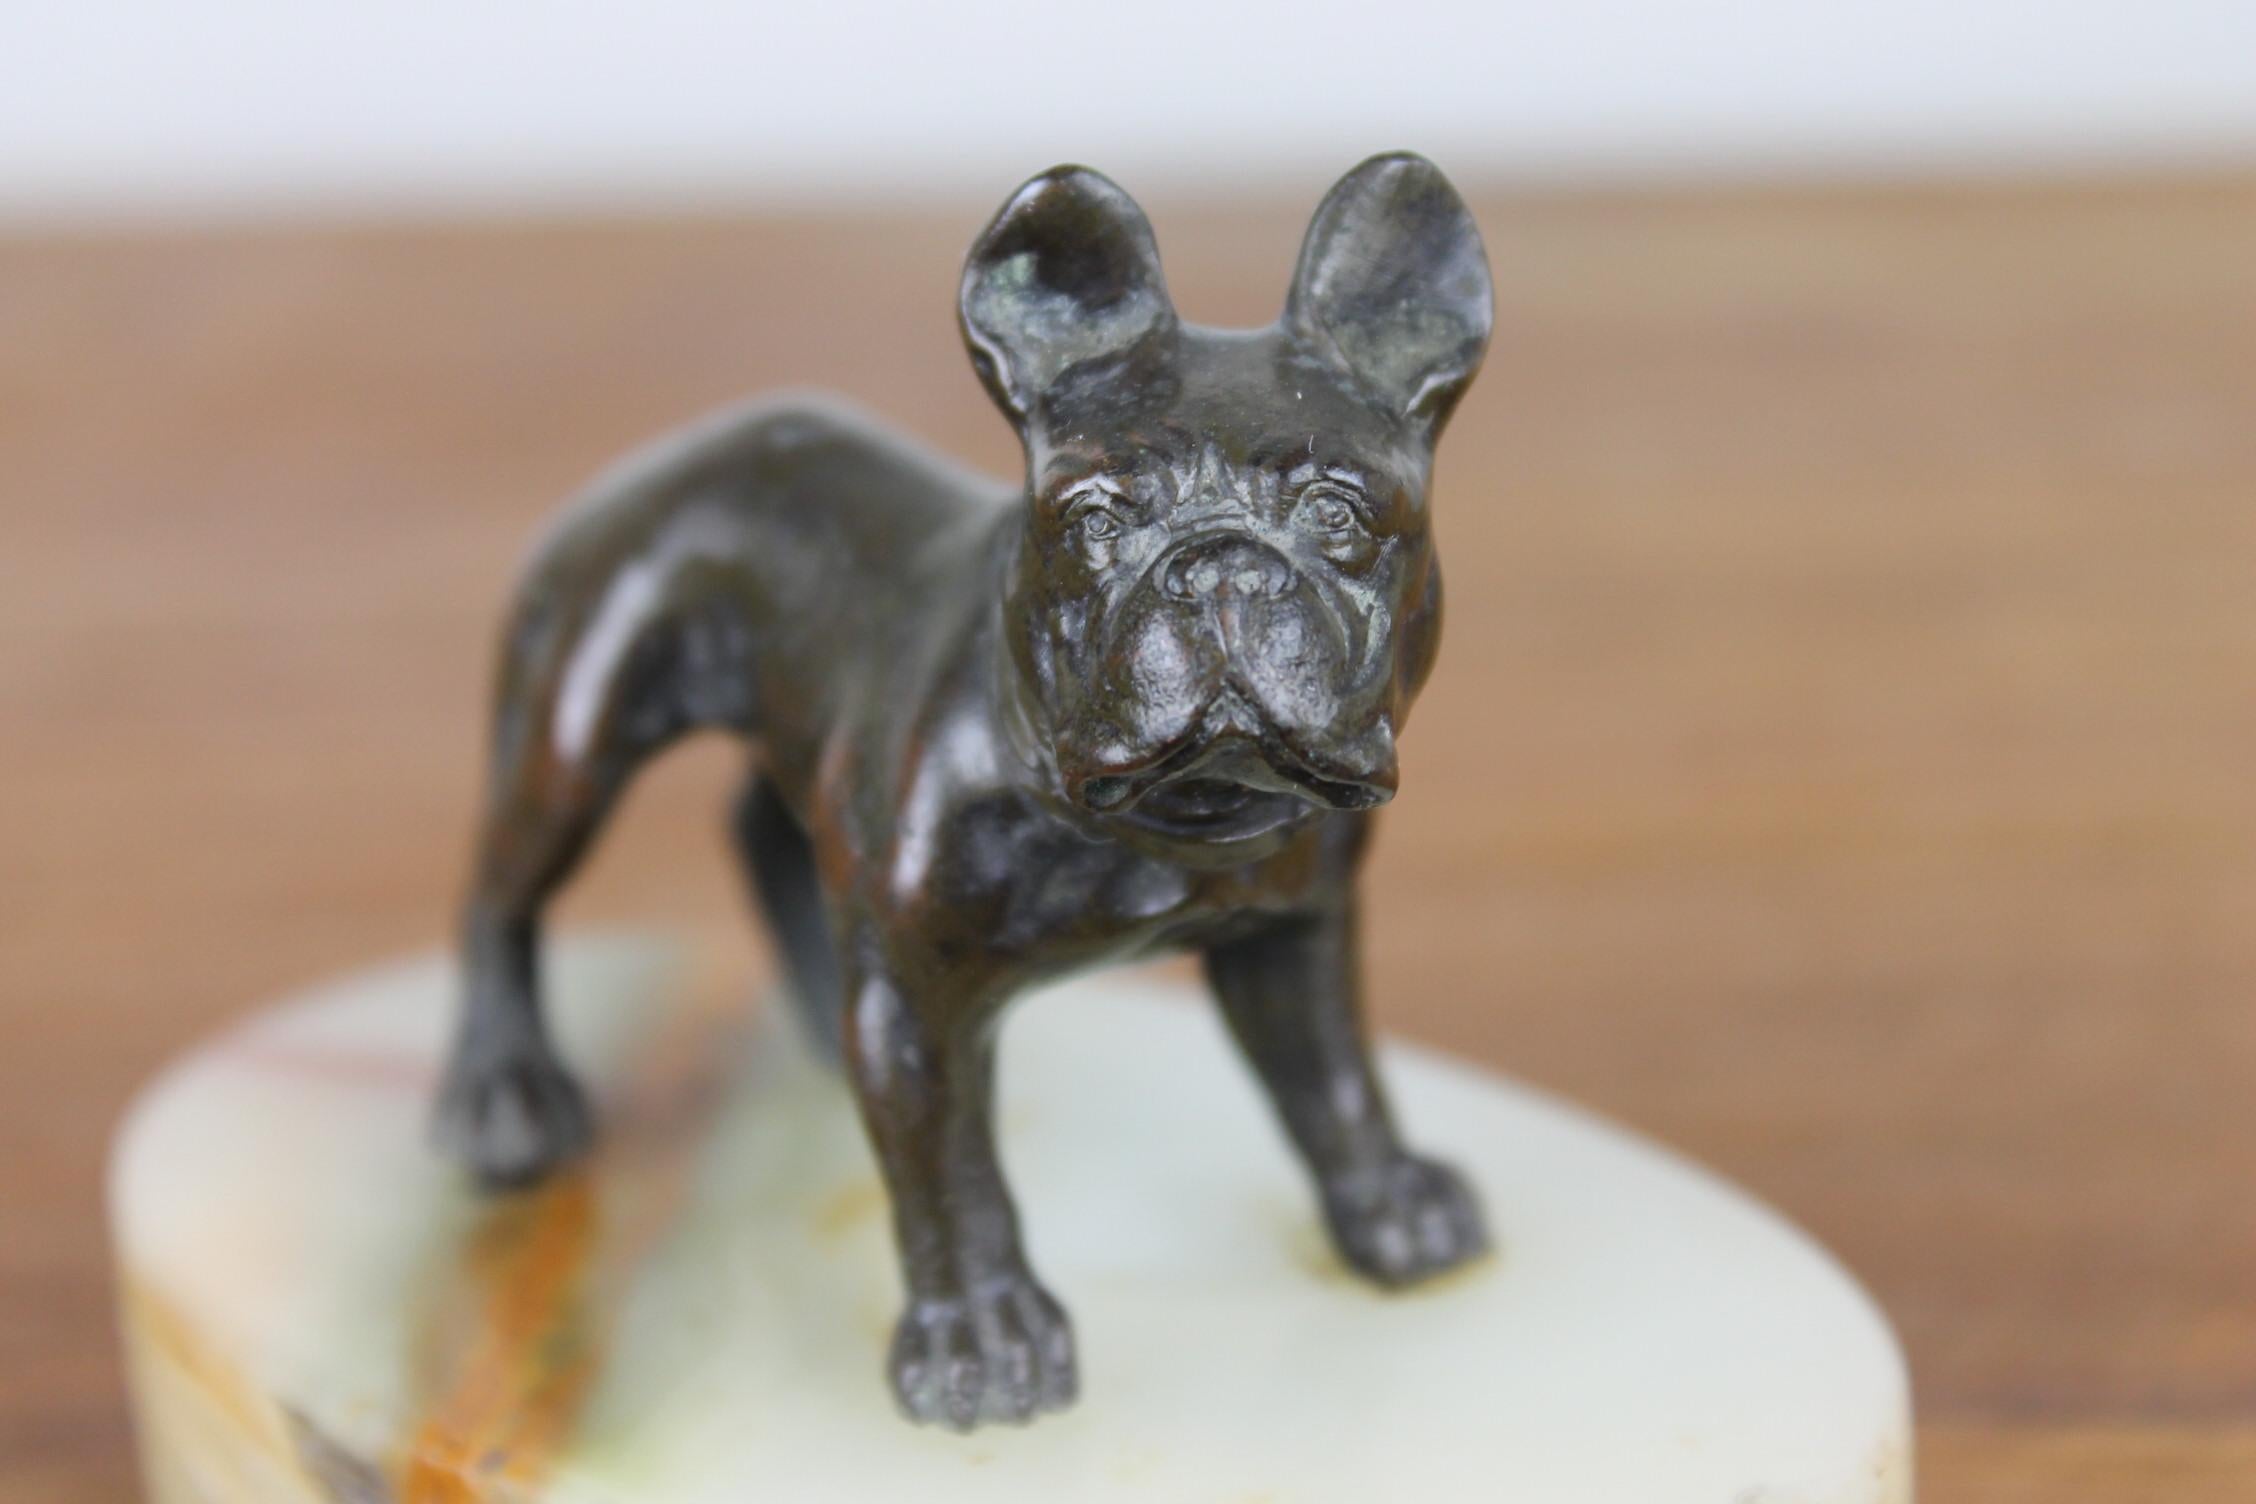 Art Deco paperweight - Presse Papier with standing bulldog on top.
Bronze bulldog mounted on marble base.
Due age, the marble base has in front two chips.
Great animal desk accessories - dog figural paperweight - bulldog collectable.